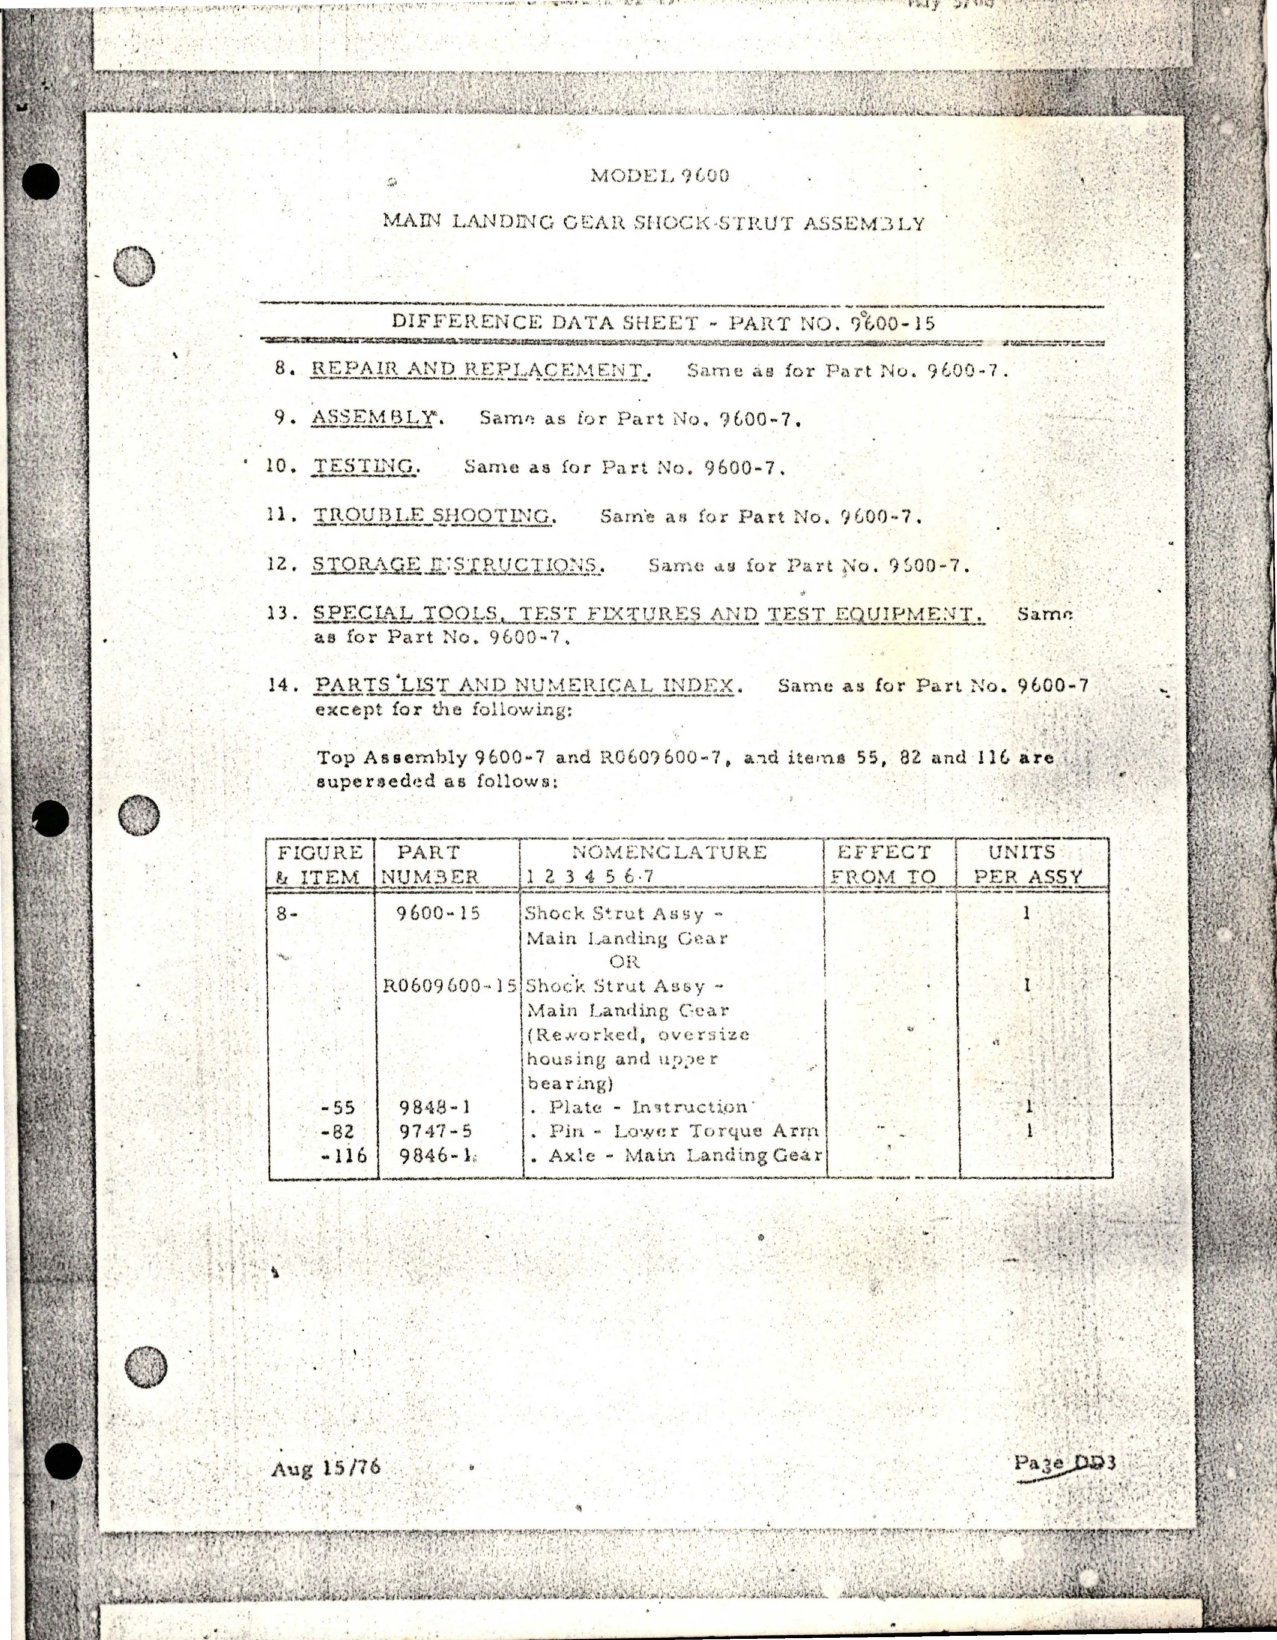 Sample page 1 from AirCorps Library document: Difference Data Sheet for Main Landing Gear Shock Strut Assembly - Part 9600-15